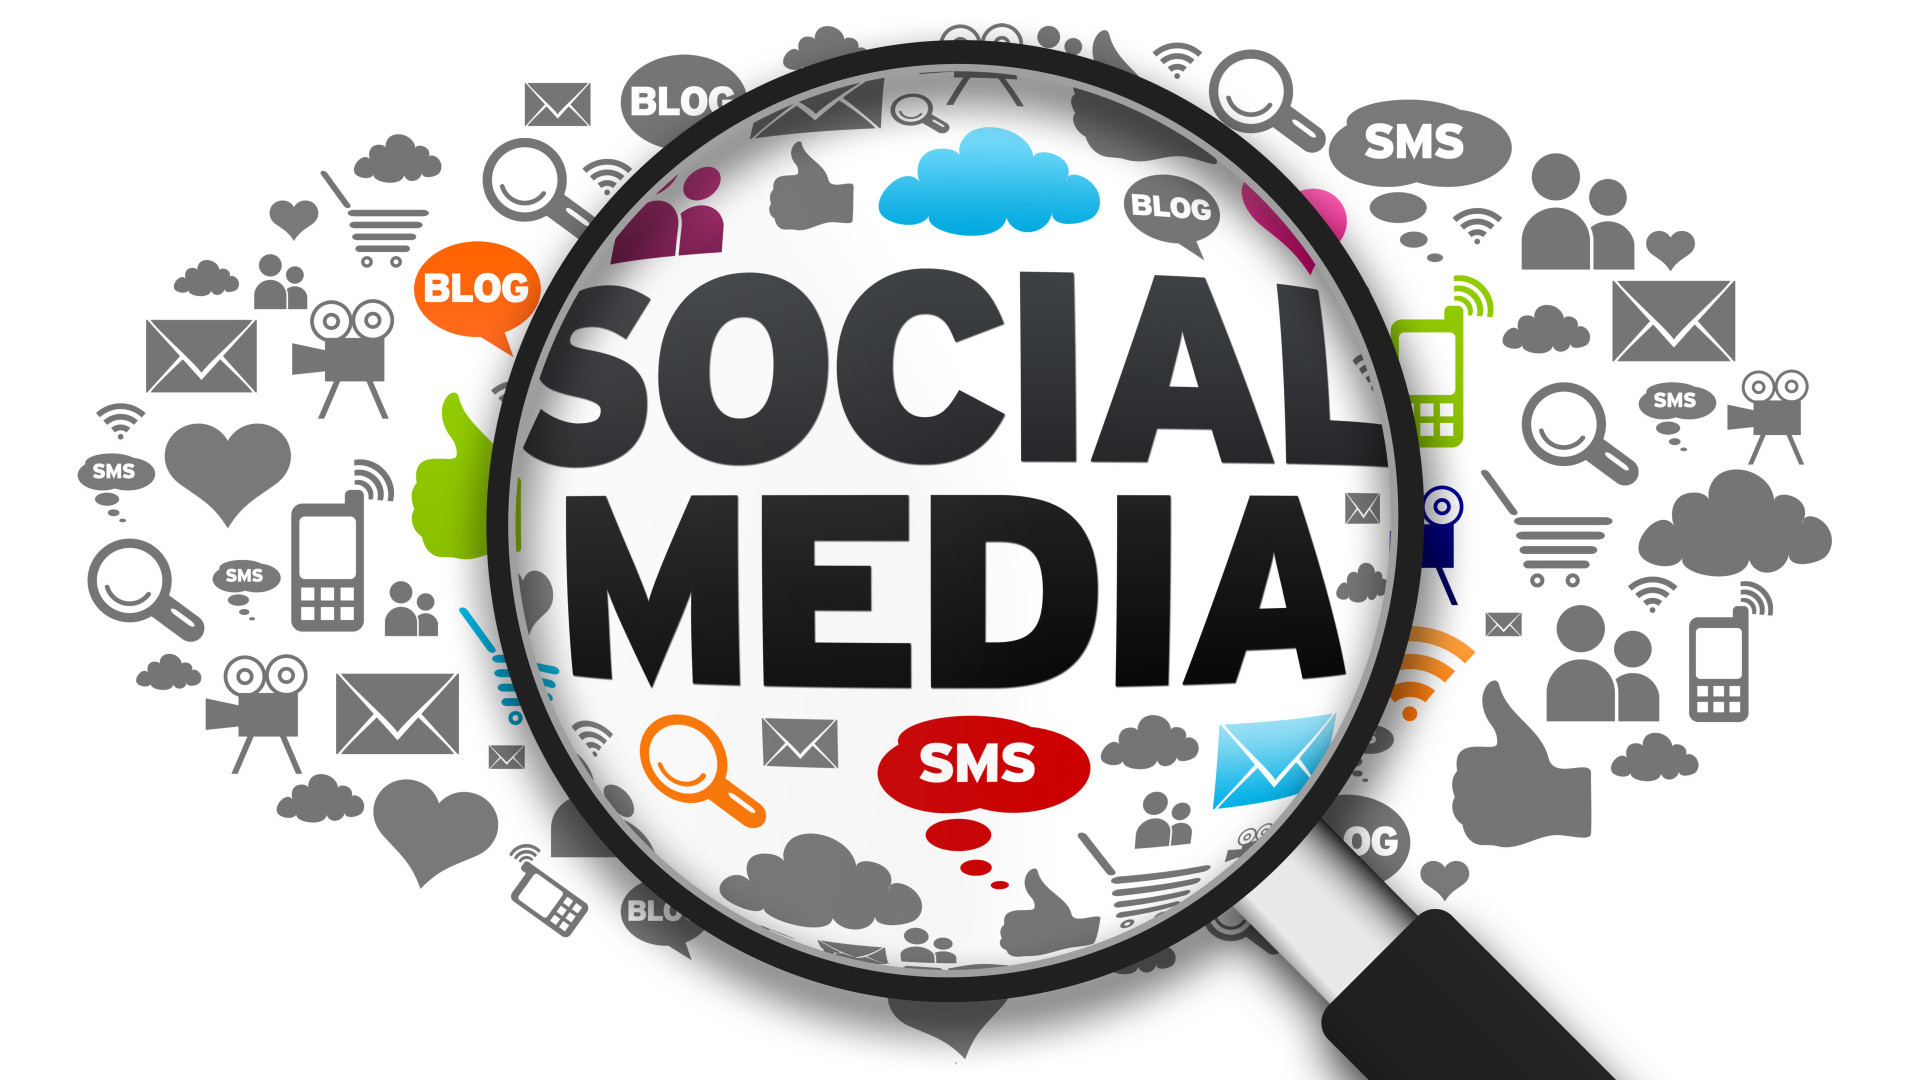 Foresee Business Growth through Social Media Marketing